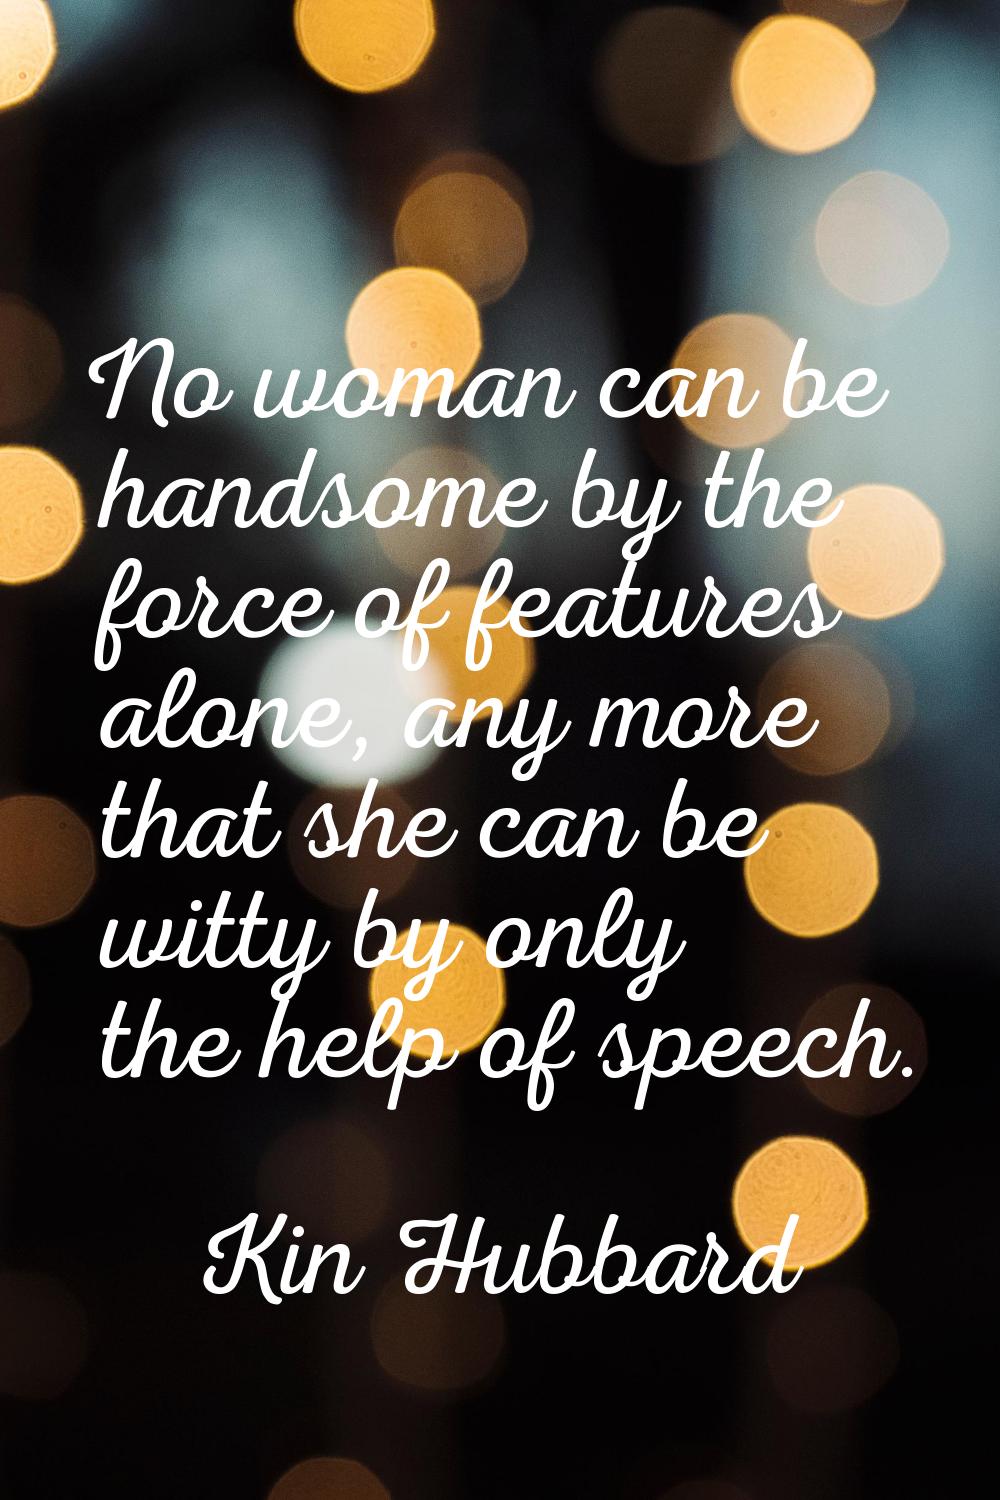 No woman can be handsome by the force of features alone, any more that she can be witty by only the